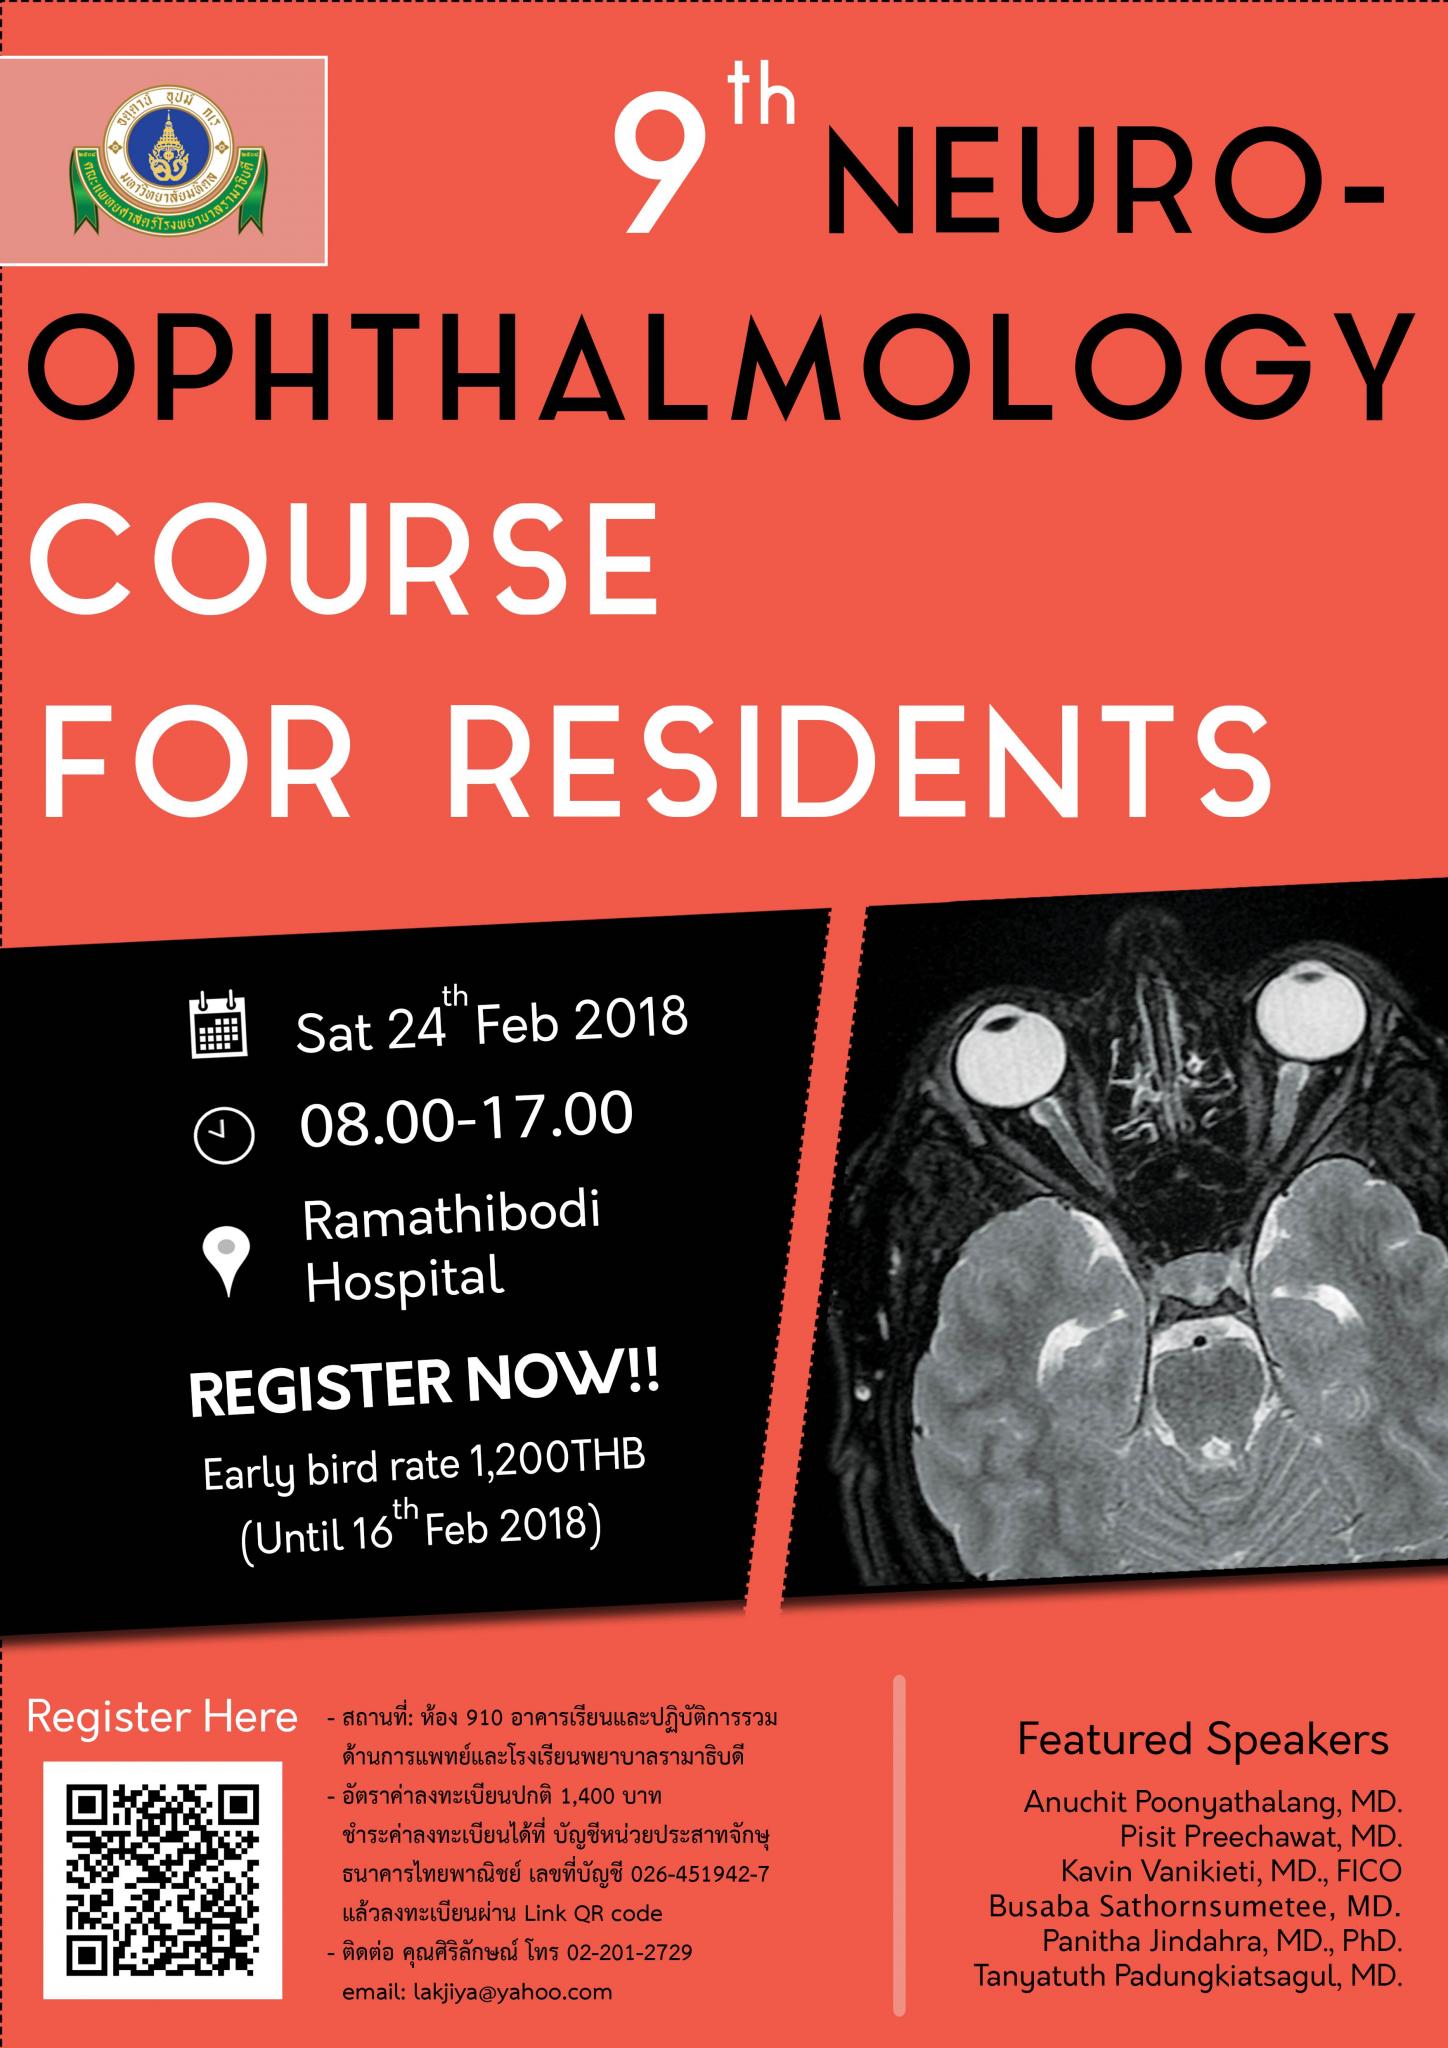 9th NEURO - OPHTHALMOLOGY COURSE FOR RESIDENTS